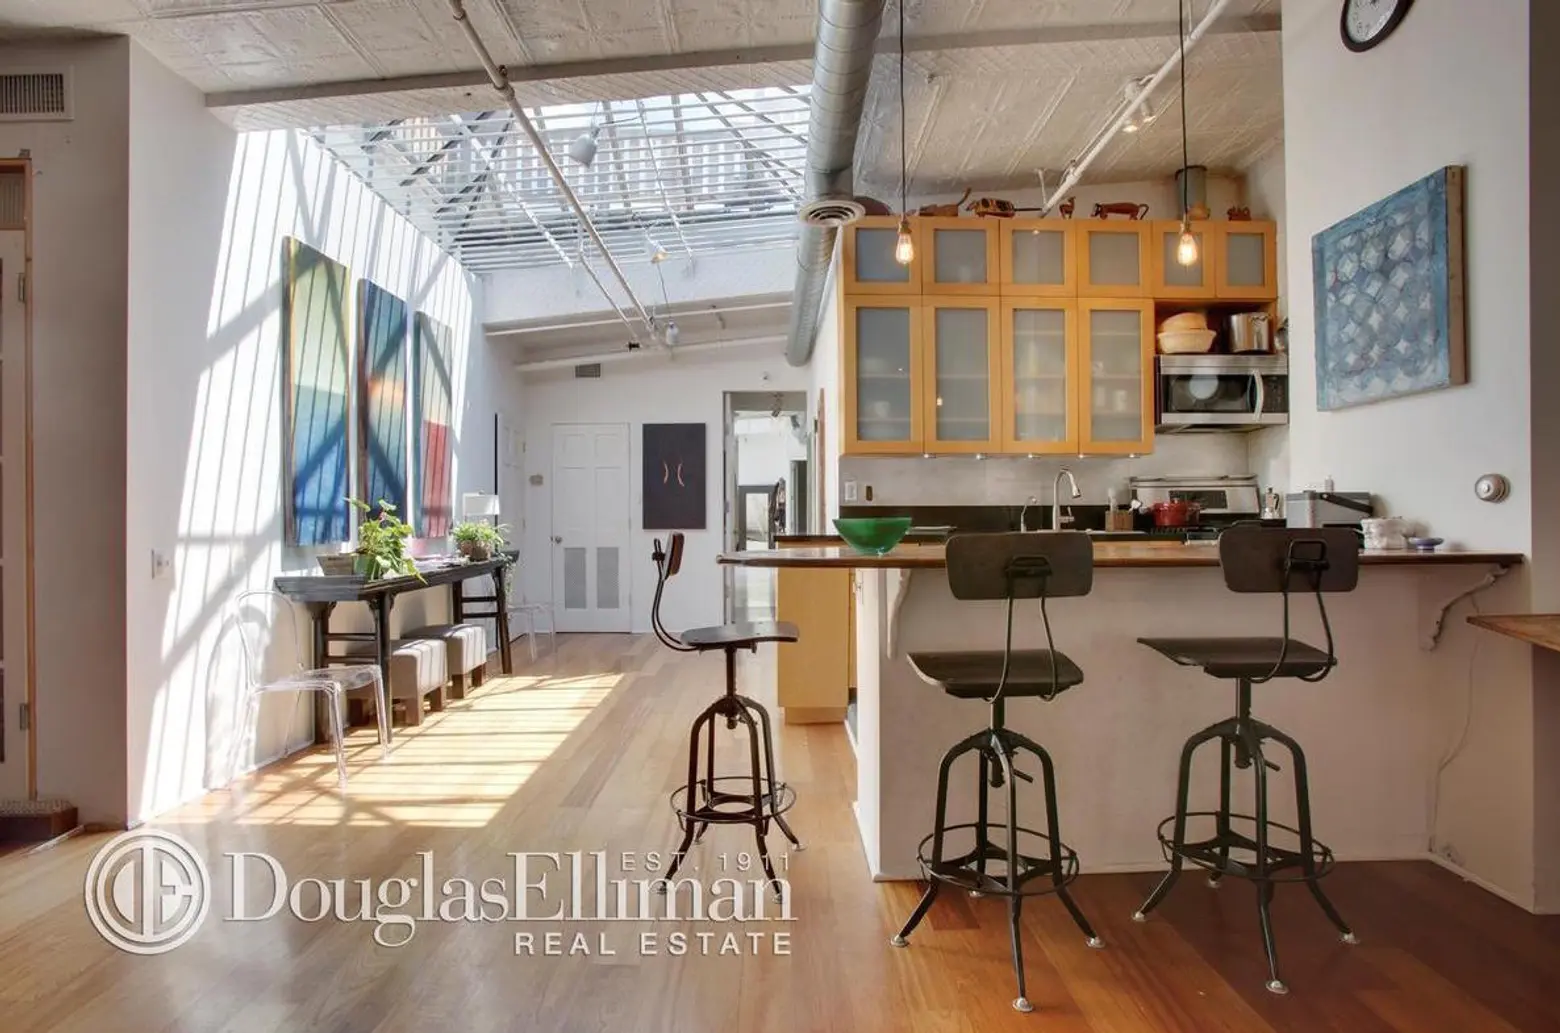 Soho Loft Has Plenty of Work Space Plus All the Comforts of Home for $9,500 a Month